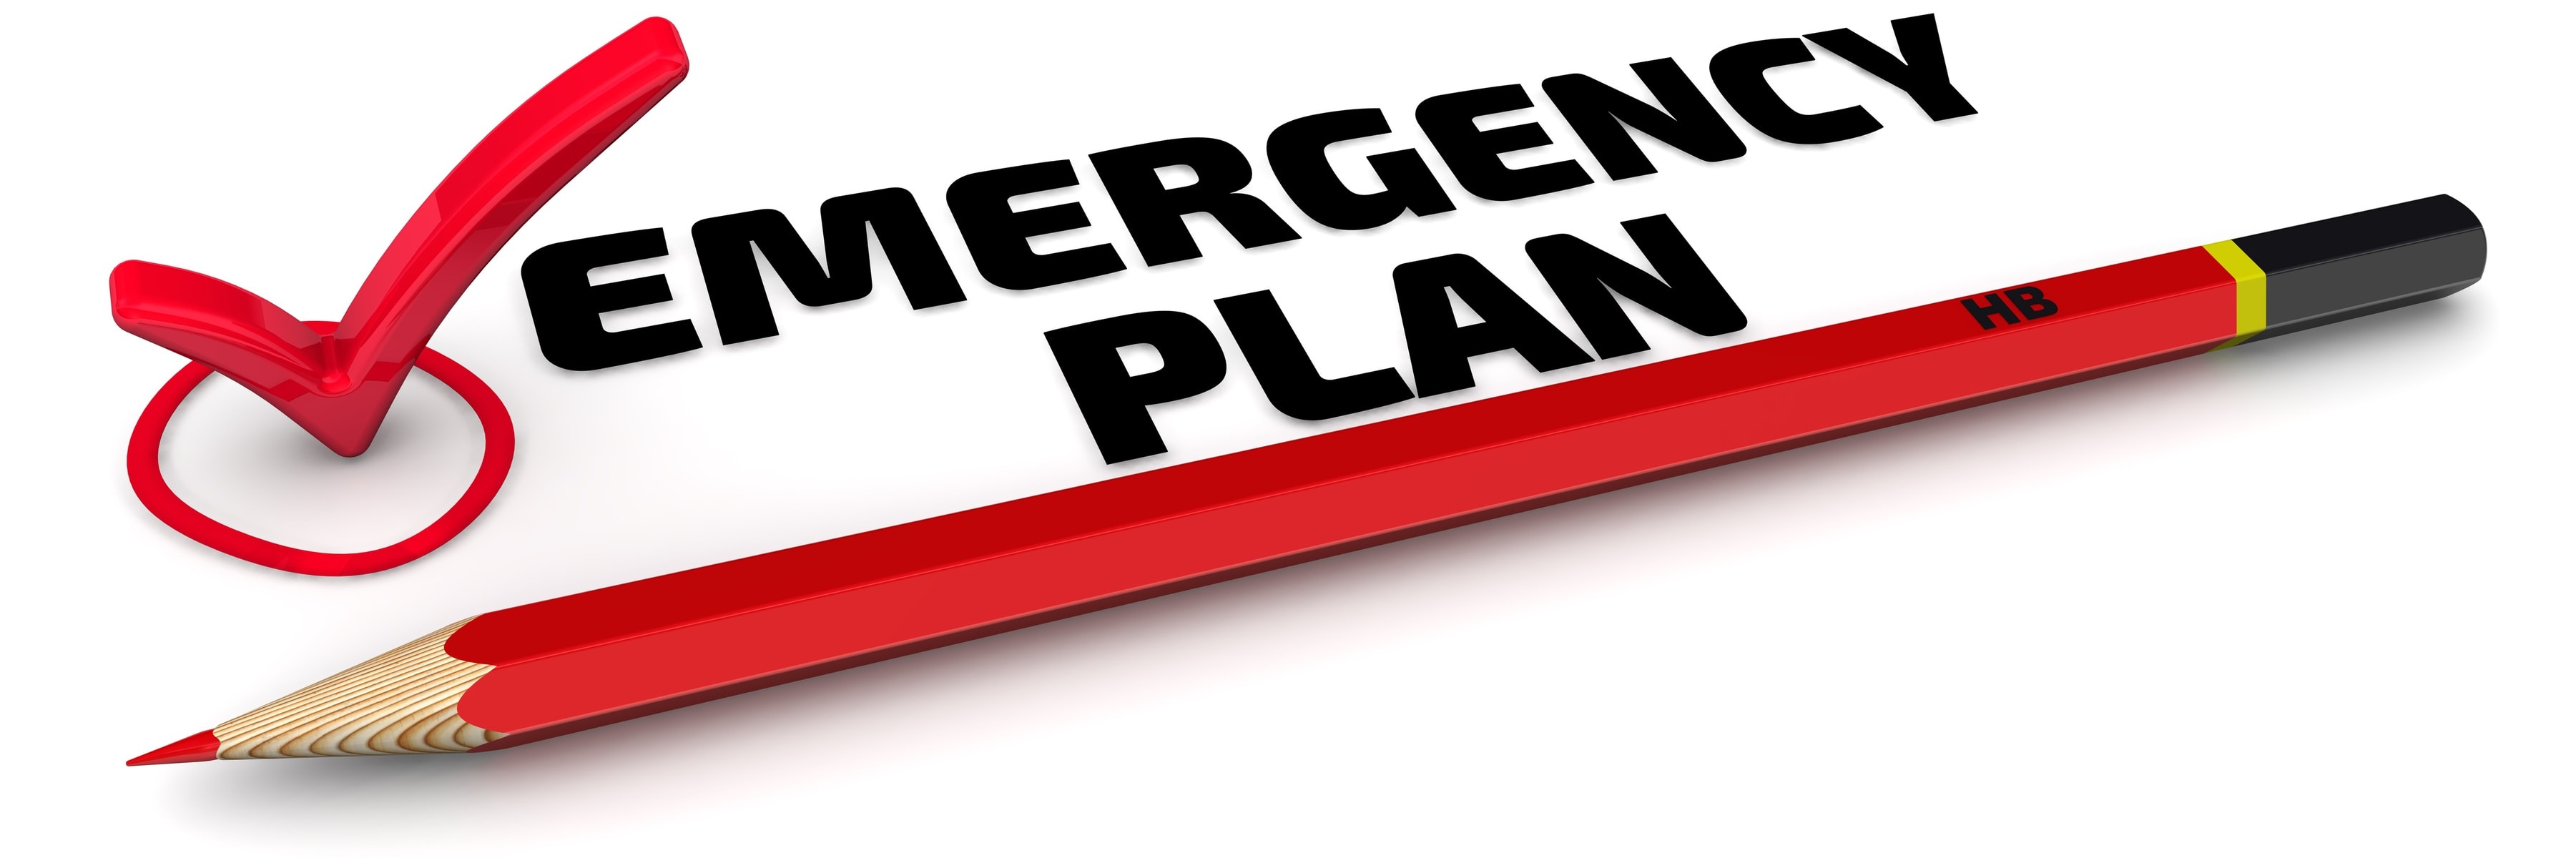 Pandemic business continuity plan